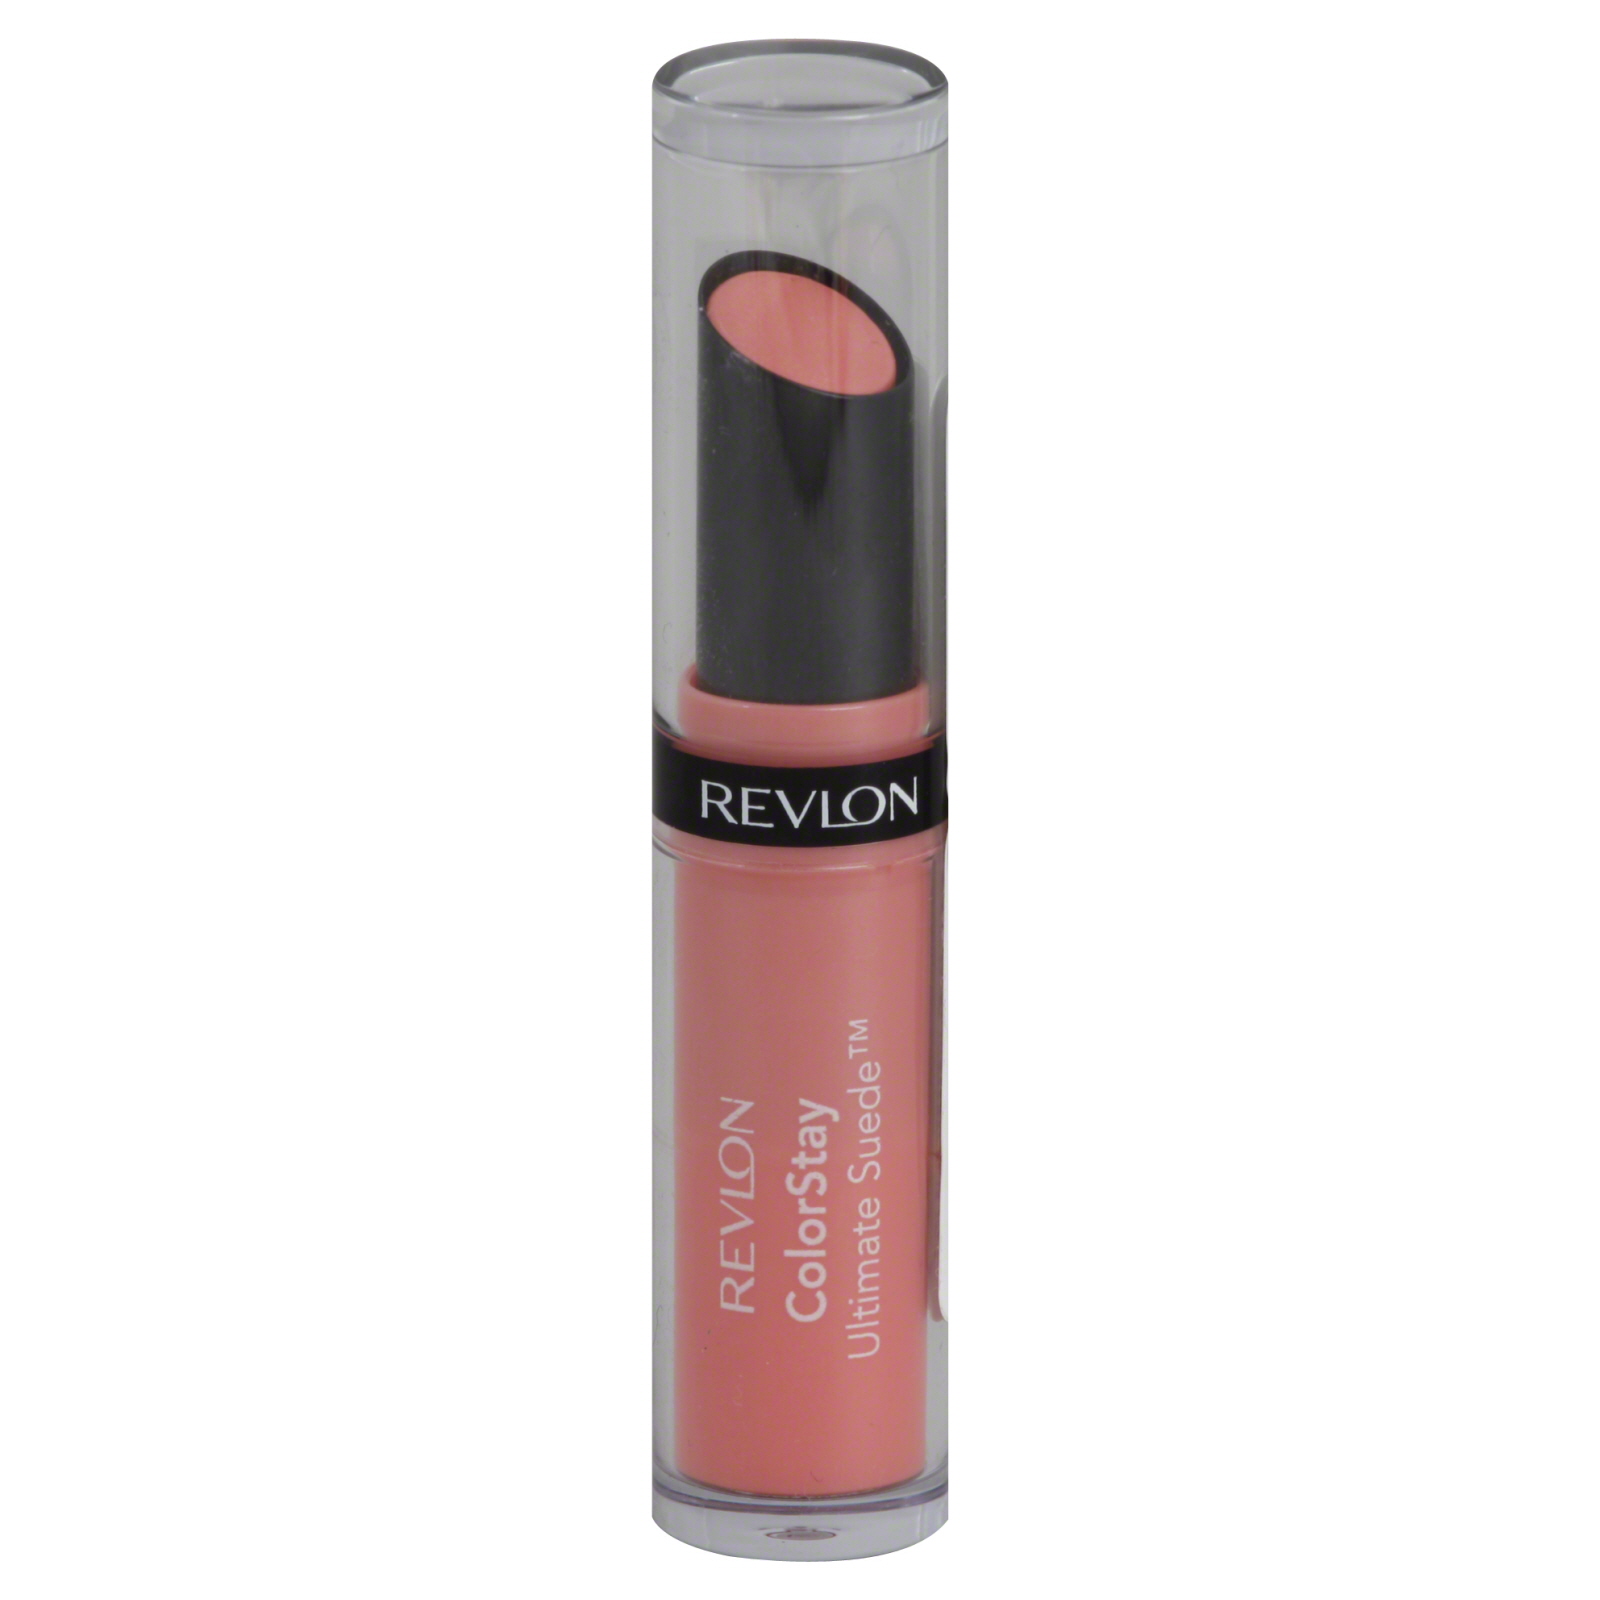 ColorStay Ultimate Suede Lipstick, Front Row 020, 0.09 oz (2.55 g)